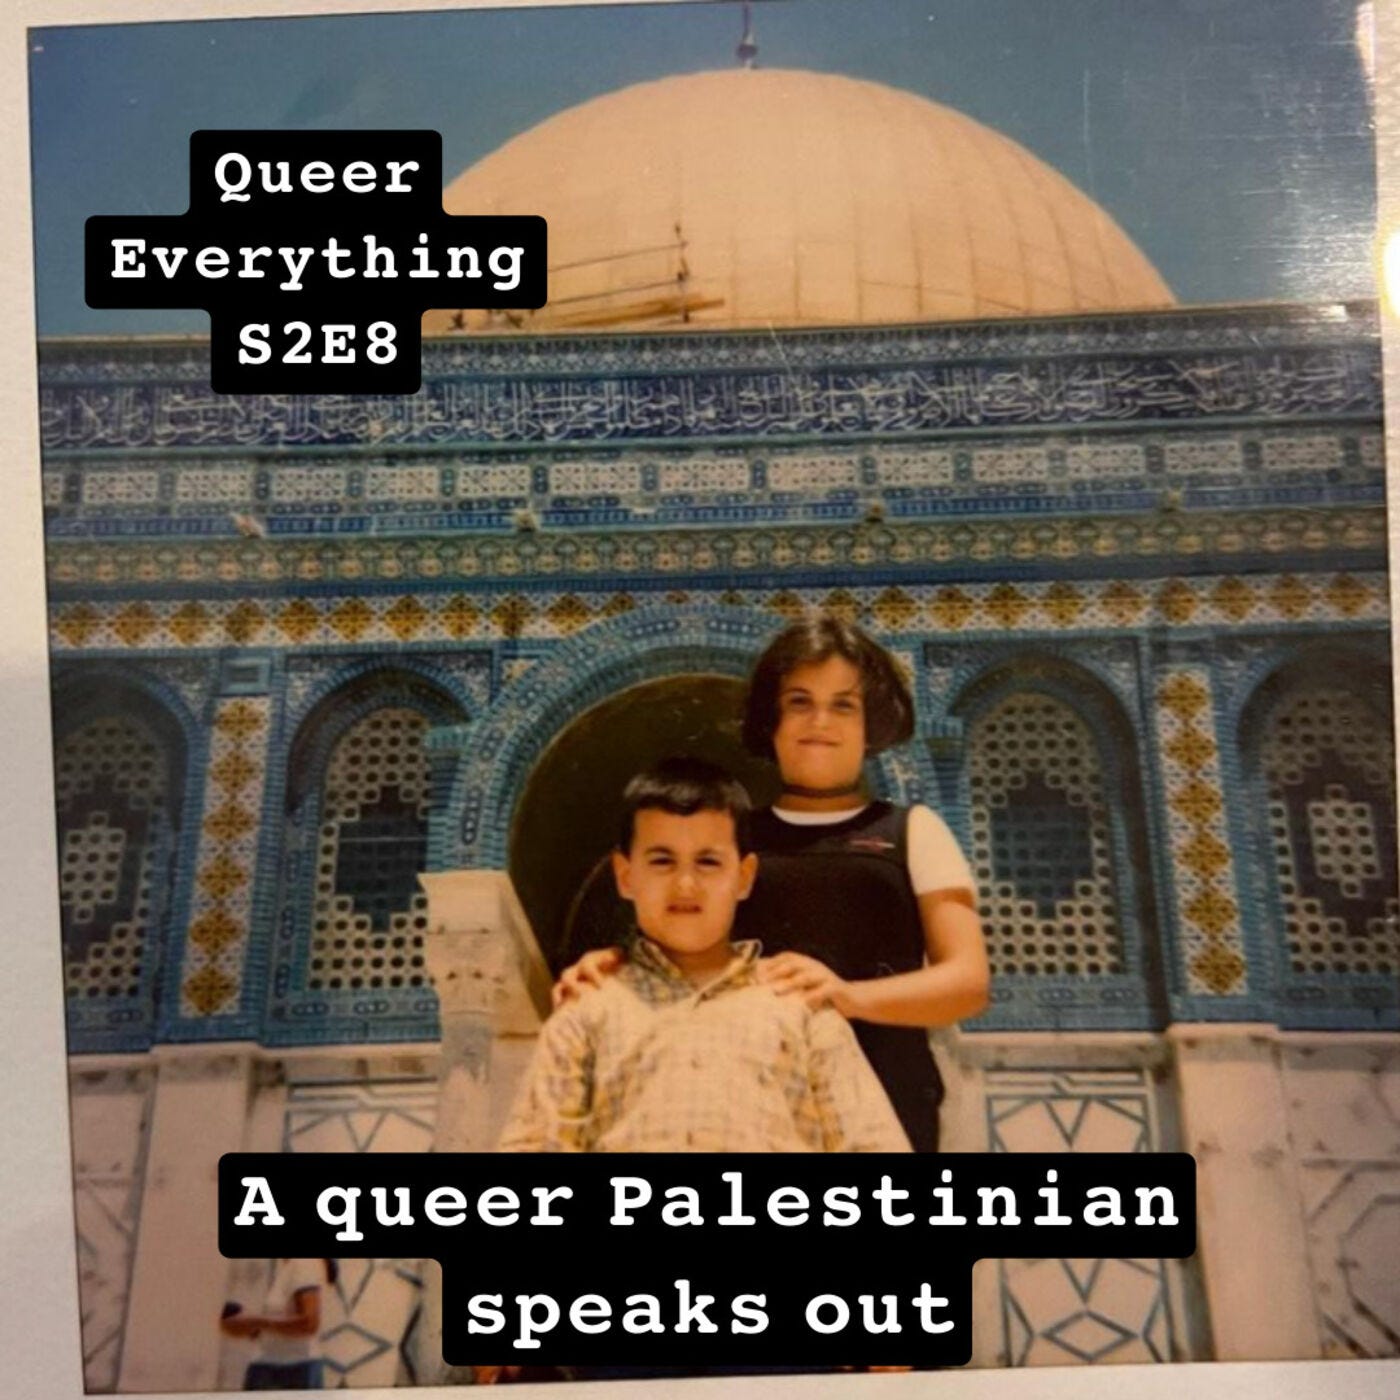 A queer Palestinian speaks out